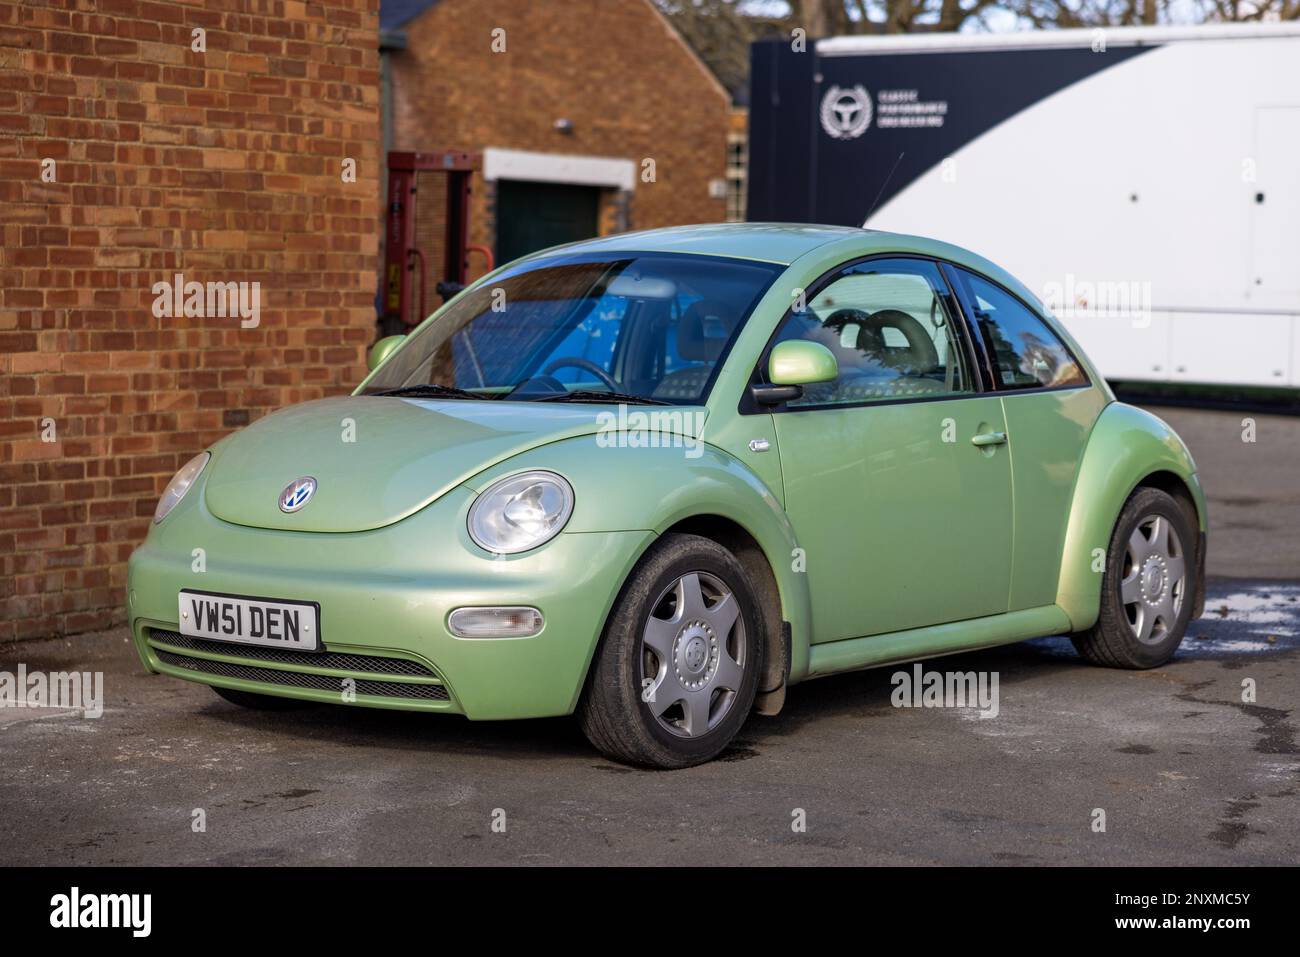 2001 Volkswagen New Beetle ‘VW51 DEN’ on display at the Bicester Heritage Centre on the 26th February 2023. Stock Photo